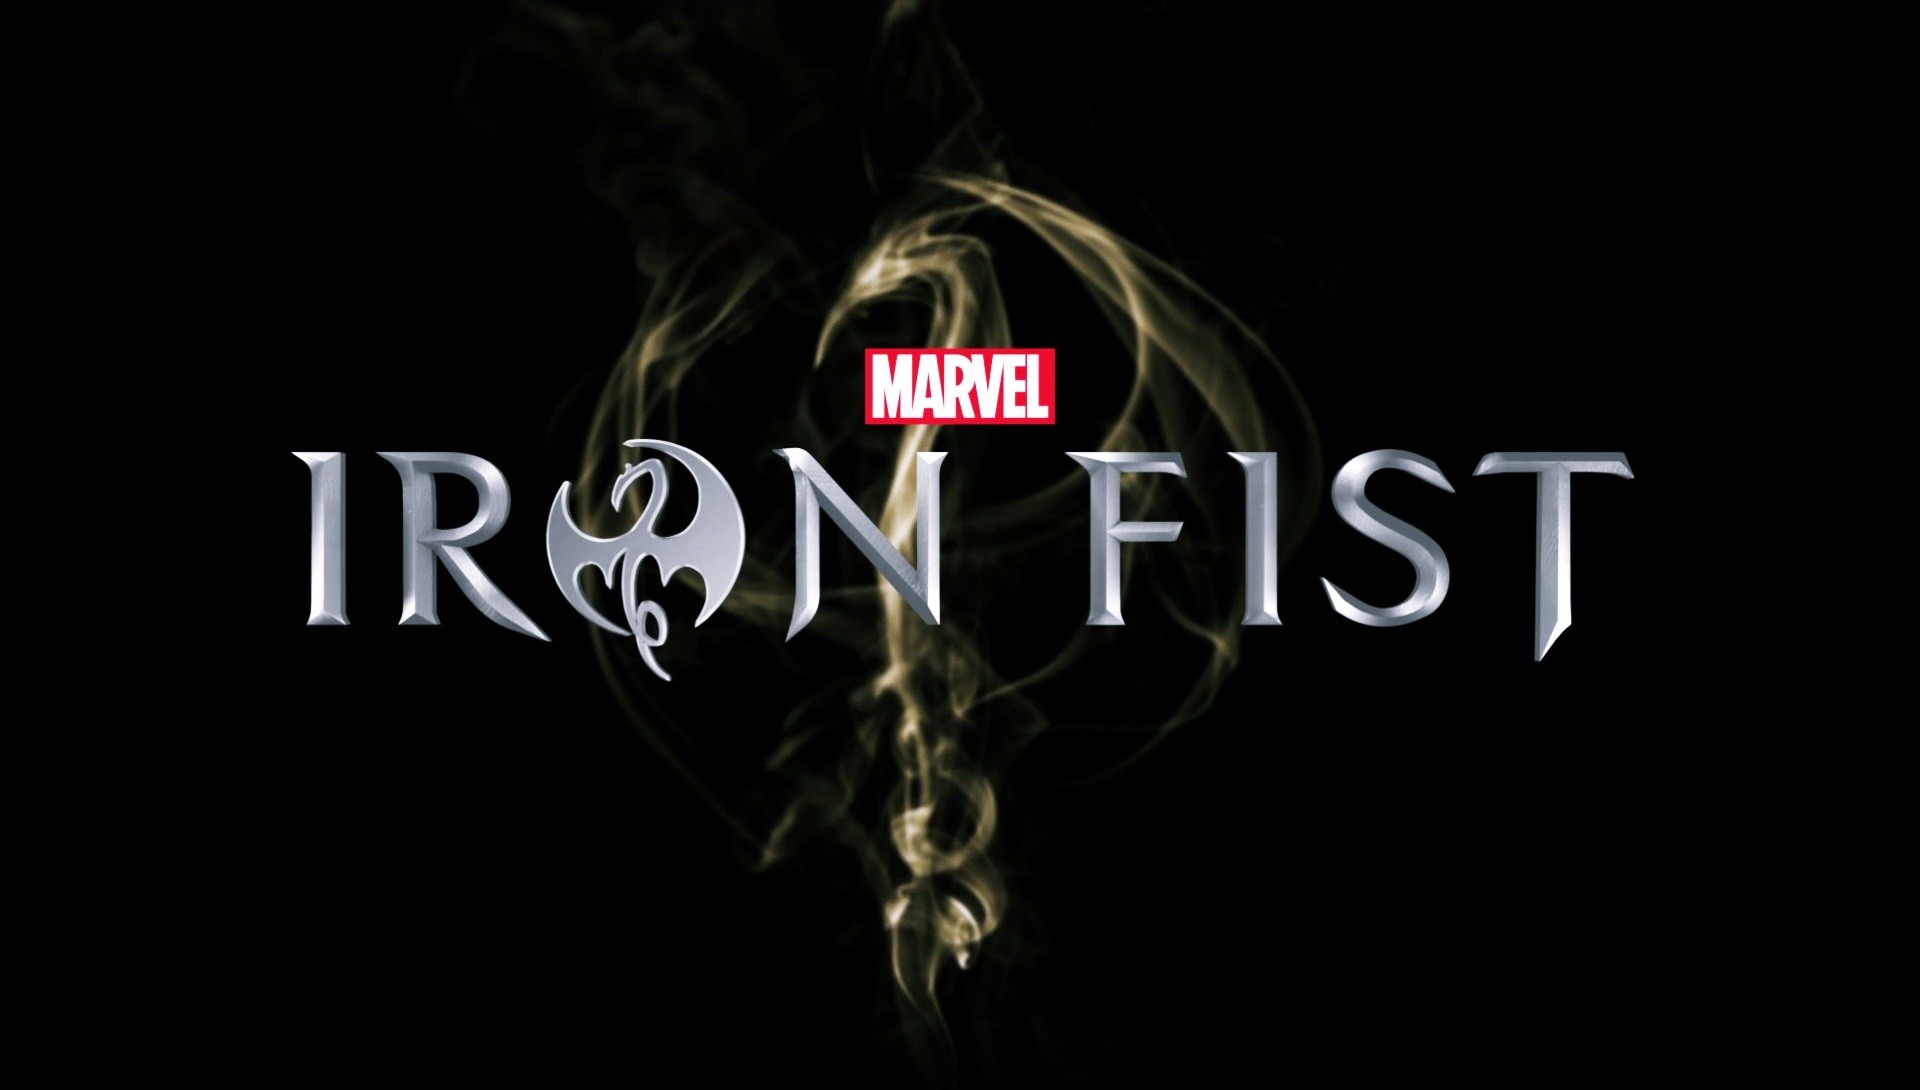 Iron Fist Wallpaper The Best Image In